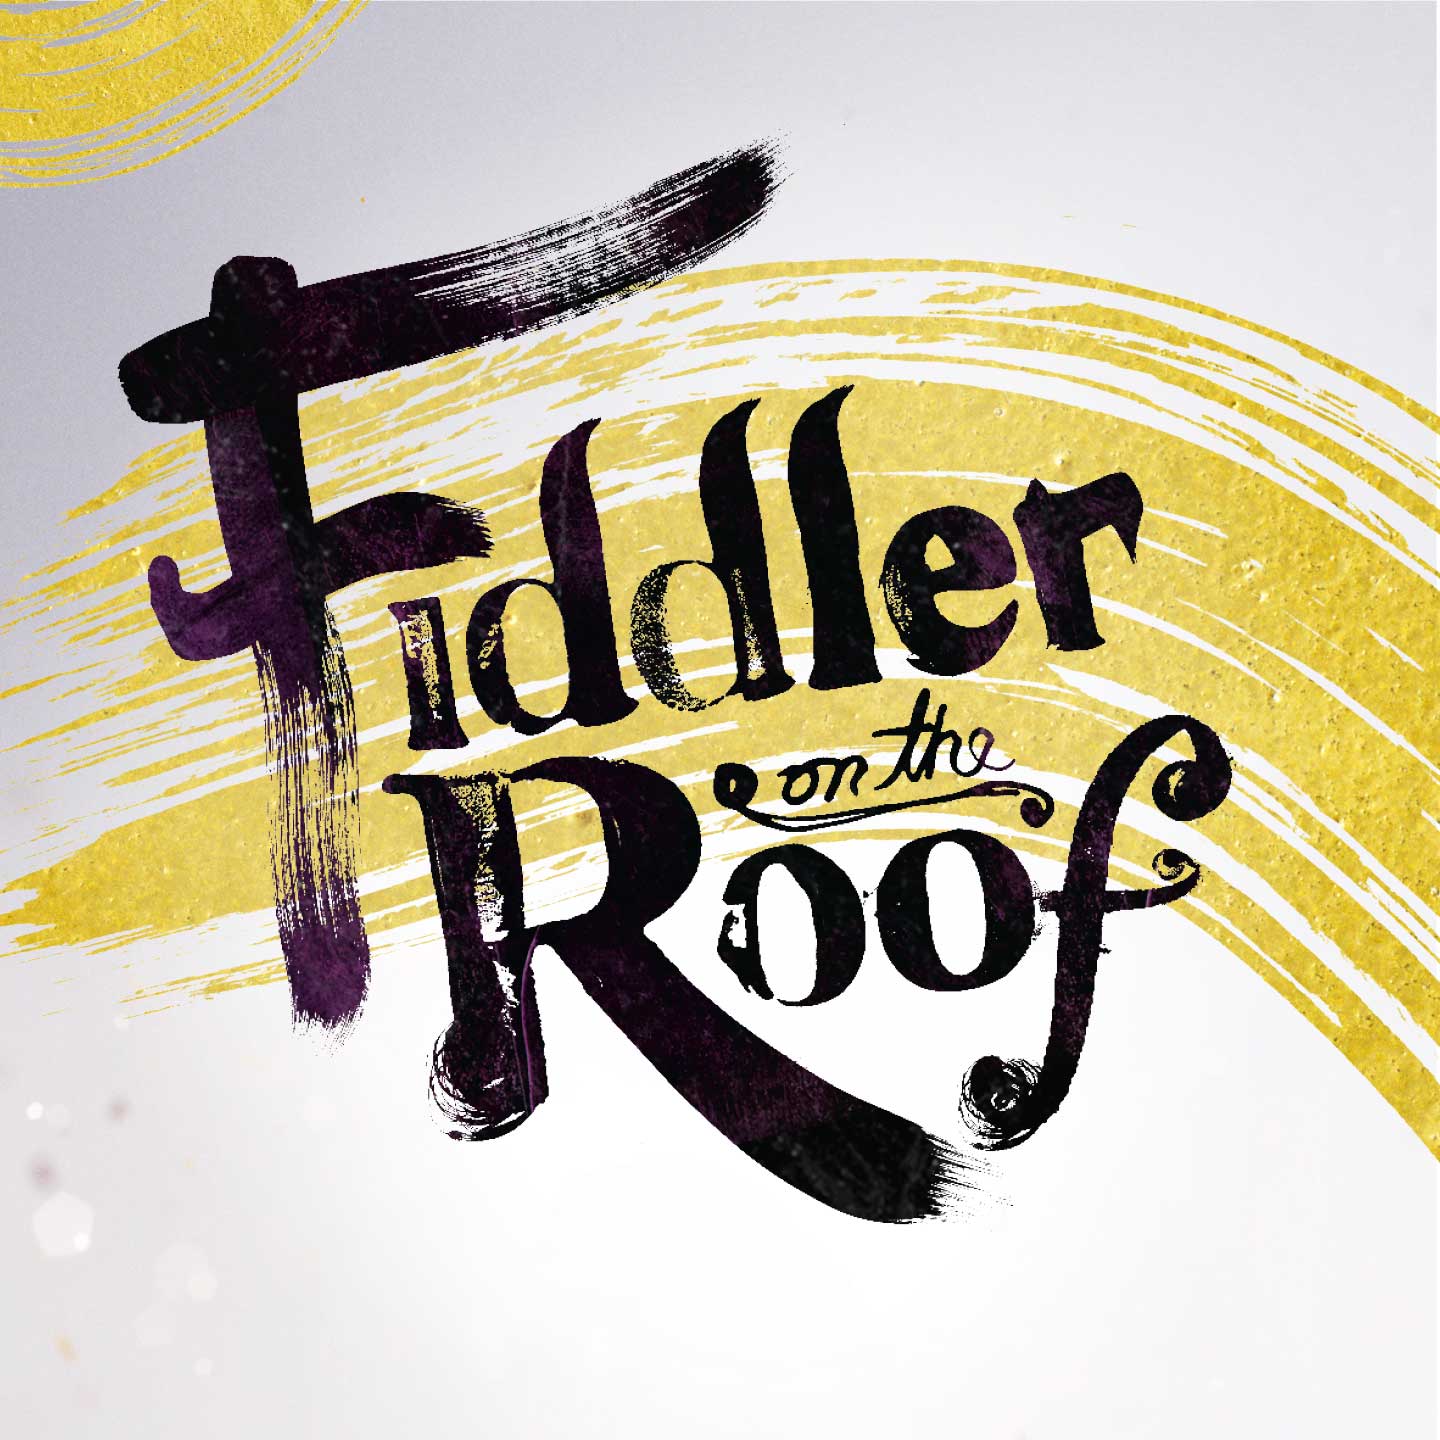 More Info for Blumenthal Partners with Local Organizations during Fiddler on the Roof to Raise Funds and Awareness About Refugee Resettlement